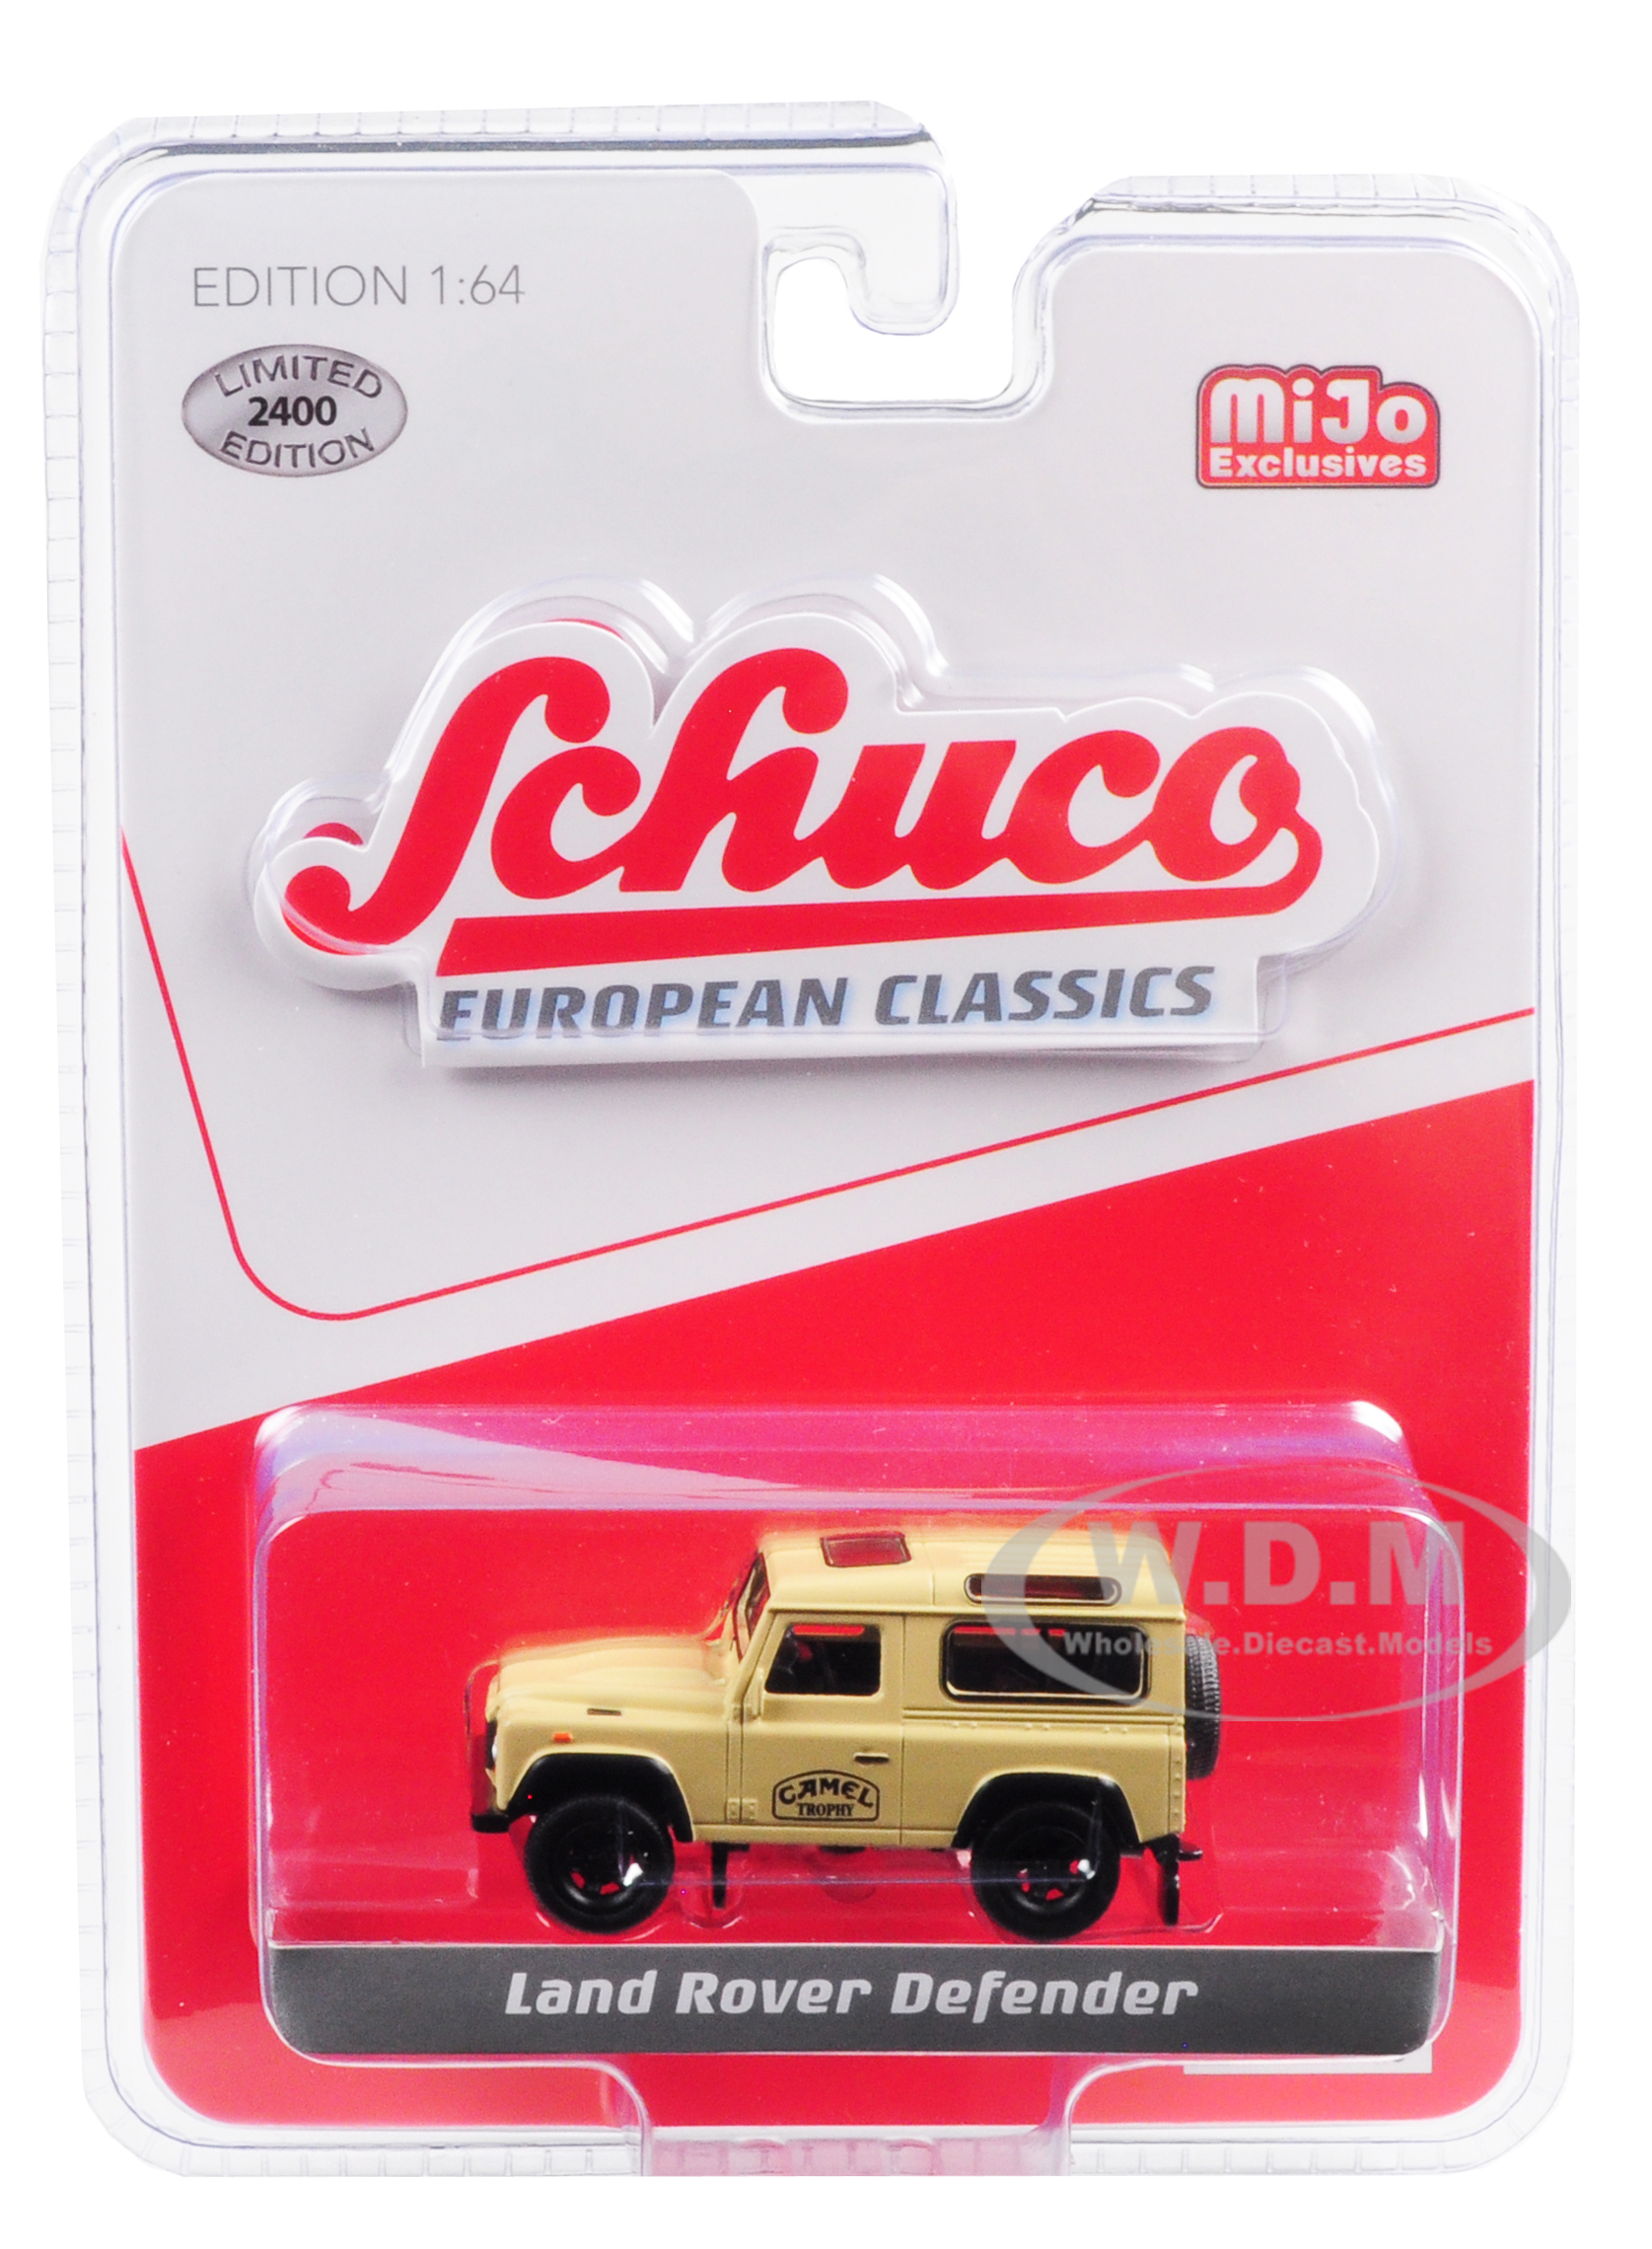 Land Rover Defender "camel" Brown "european Classics" Series Limited Edition To 2400 Pieces Worldwide 1/64 Diecast Model Car By Schuco